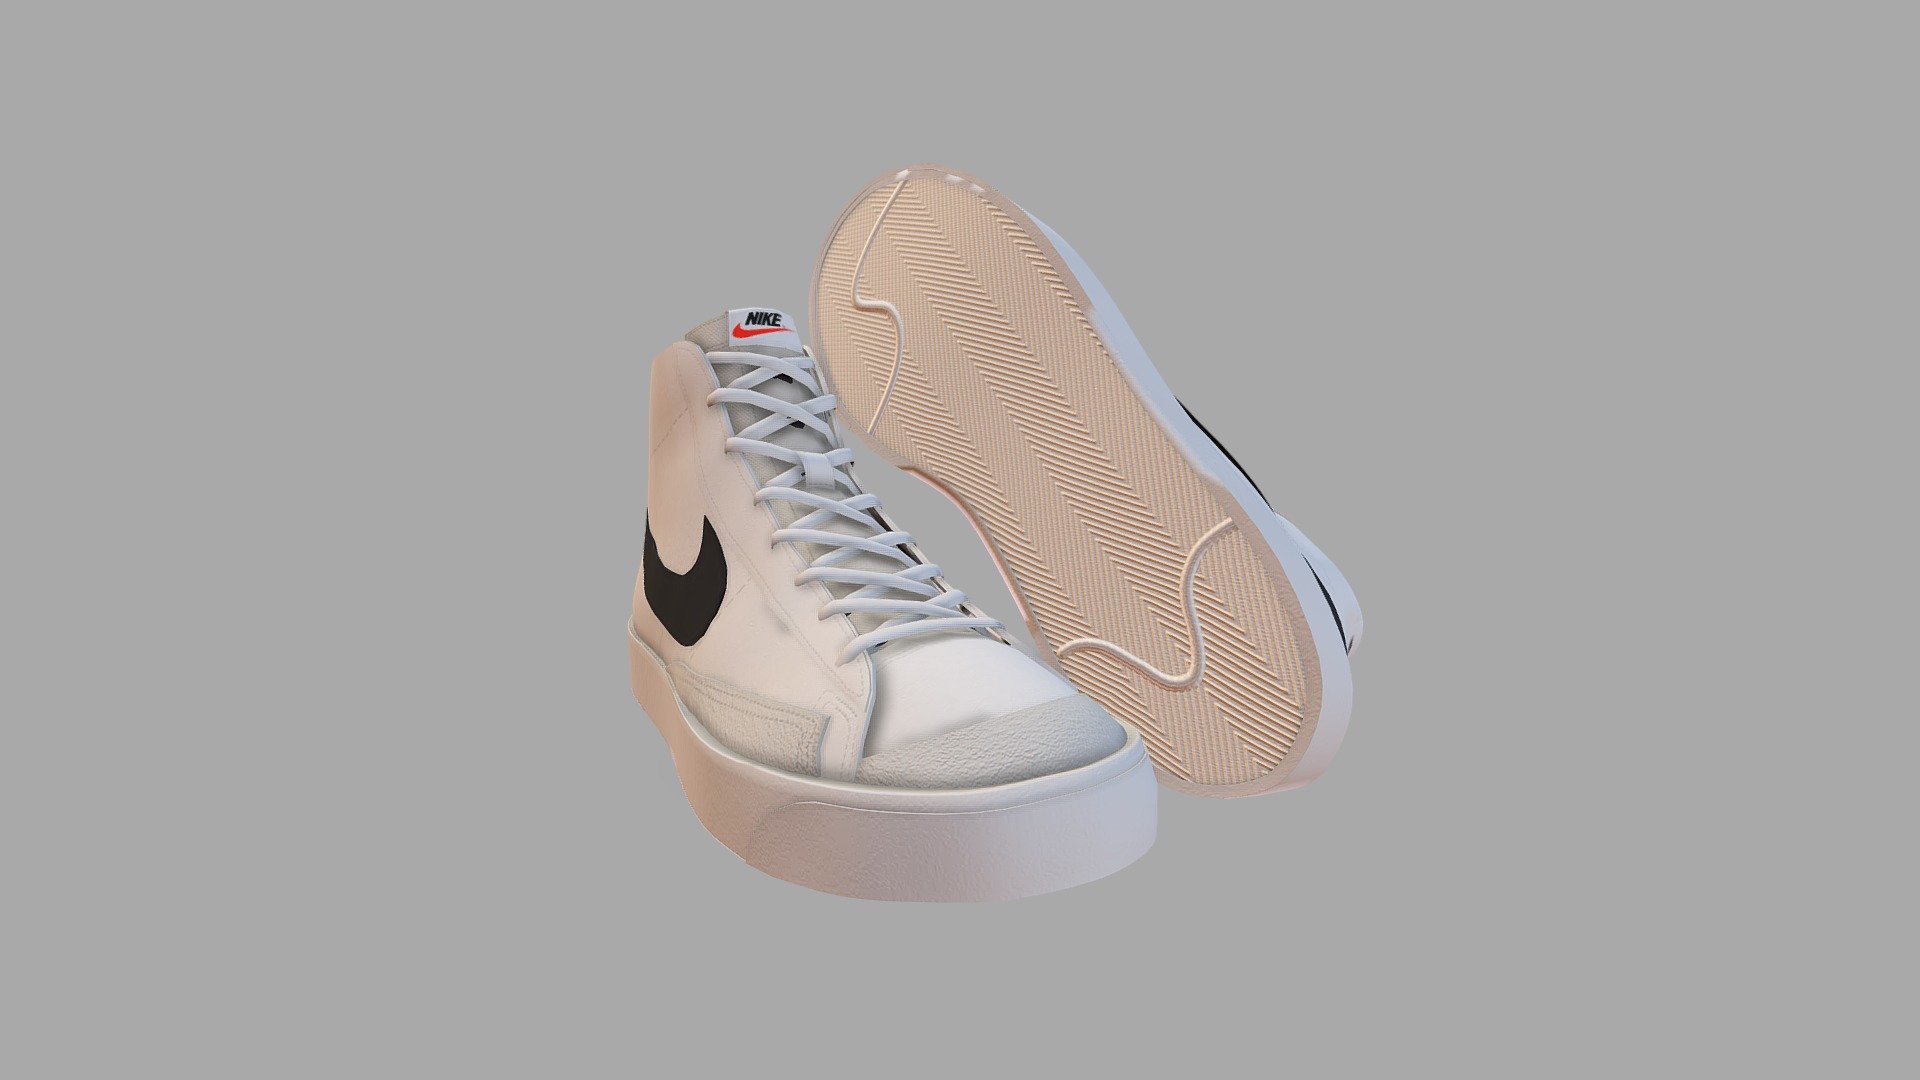 This model contains 15 PBR textures and 5 Maps, everything is optimised and game ready.

Lower Poly Nike Blazers Highs

Commercial License - Can be used in free products and paid products please credit - Nike Blazer Highs - Buy Royalty Free 3D model by Williem 3d model